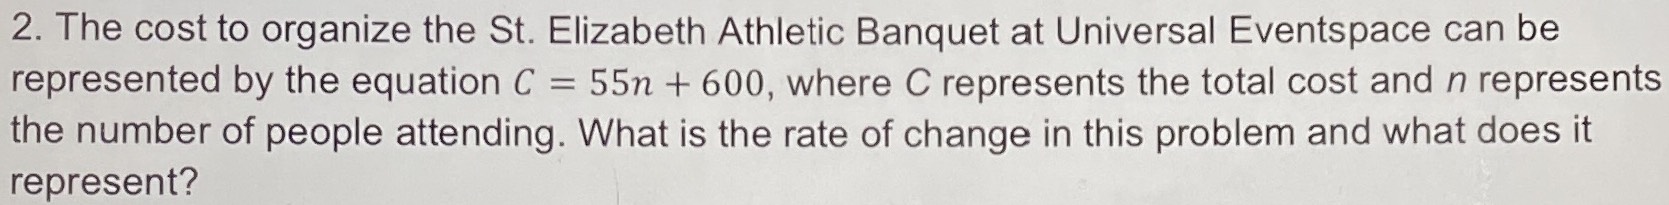 2. The cost to organize the St. Elizabeth Athletic...